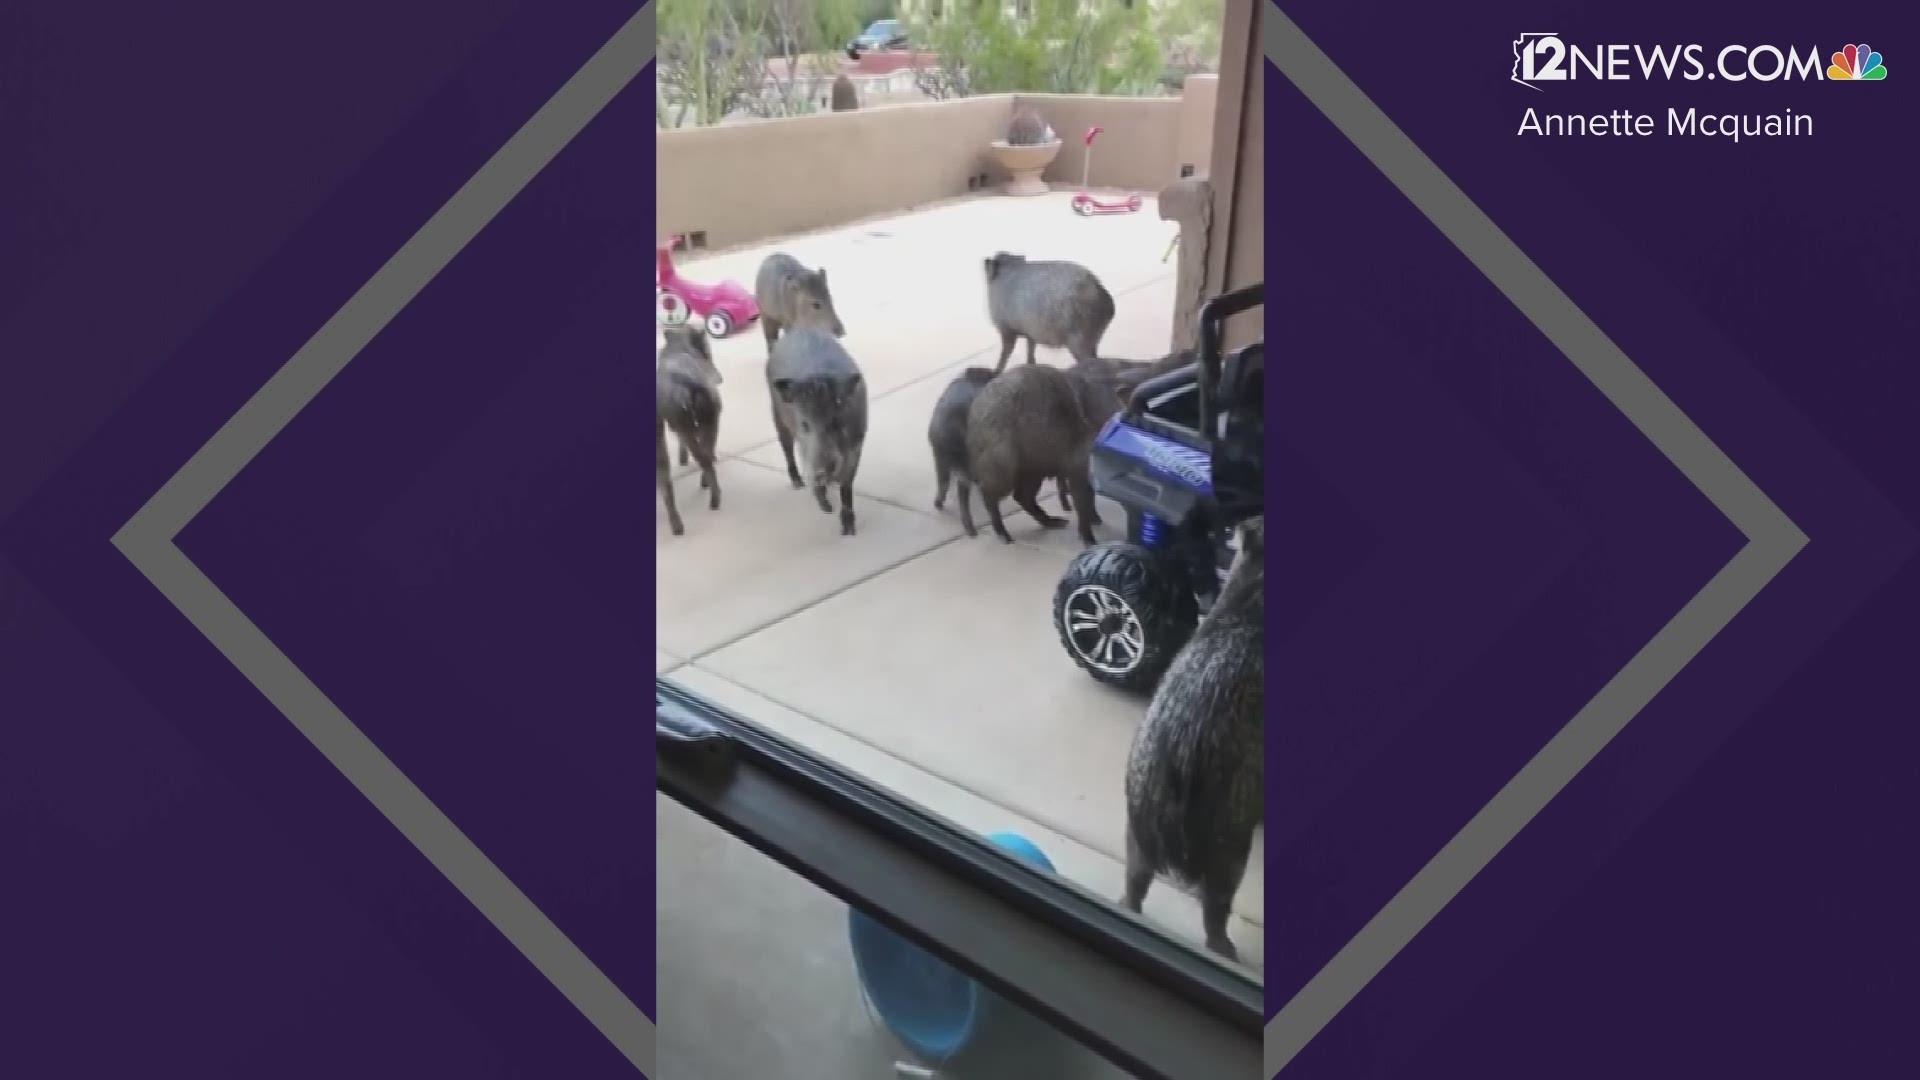 A squadron of javelinas was seen playing and scavenging in a front yard in Cave Creek, Arizona. Annette Macquain captured the video. She opened the door only a crack.